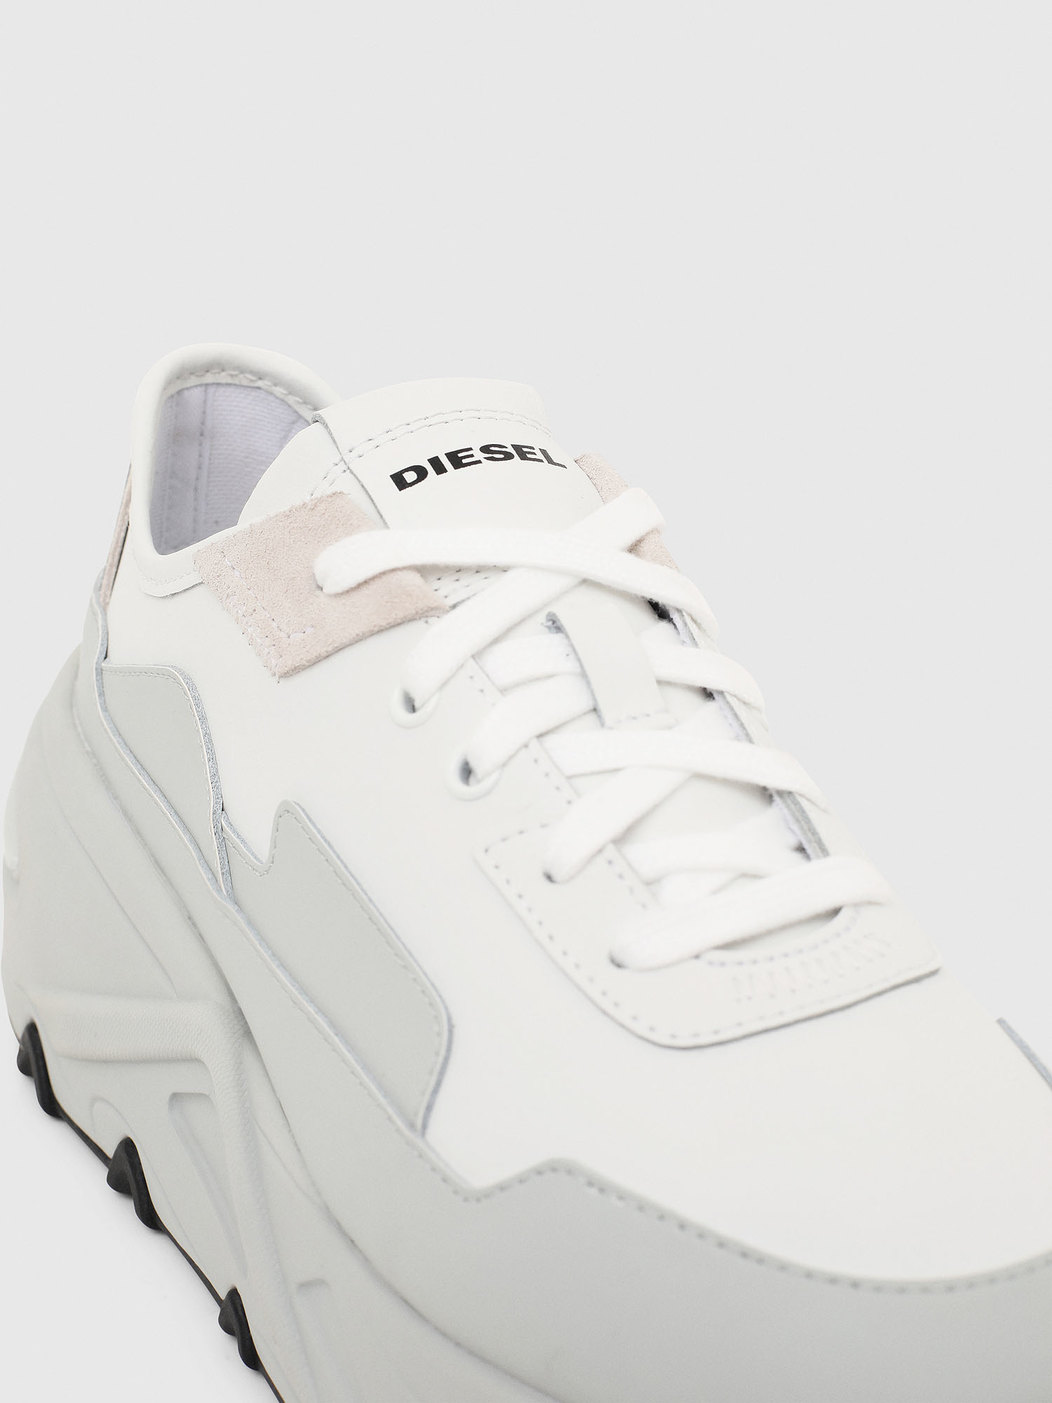 Chunky Sneakers With Two-Tone Design